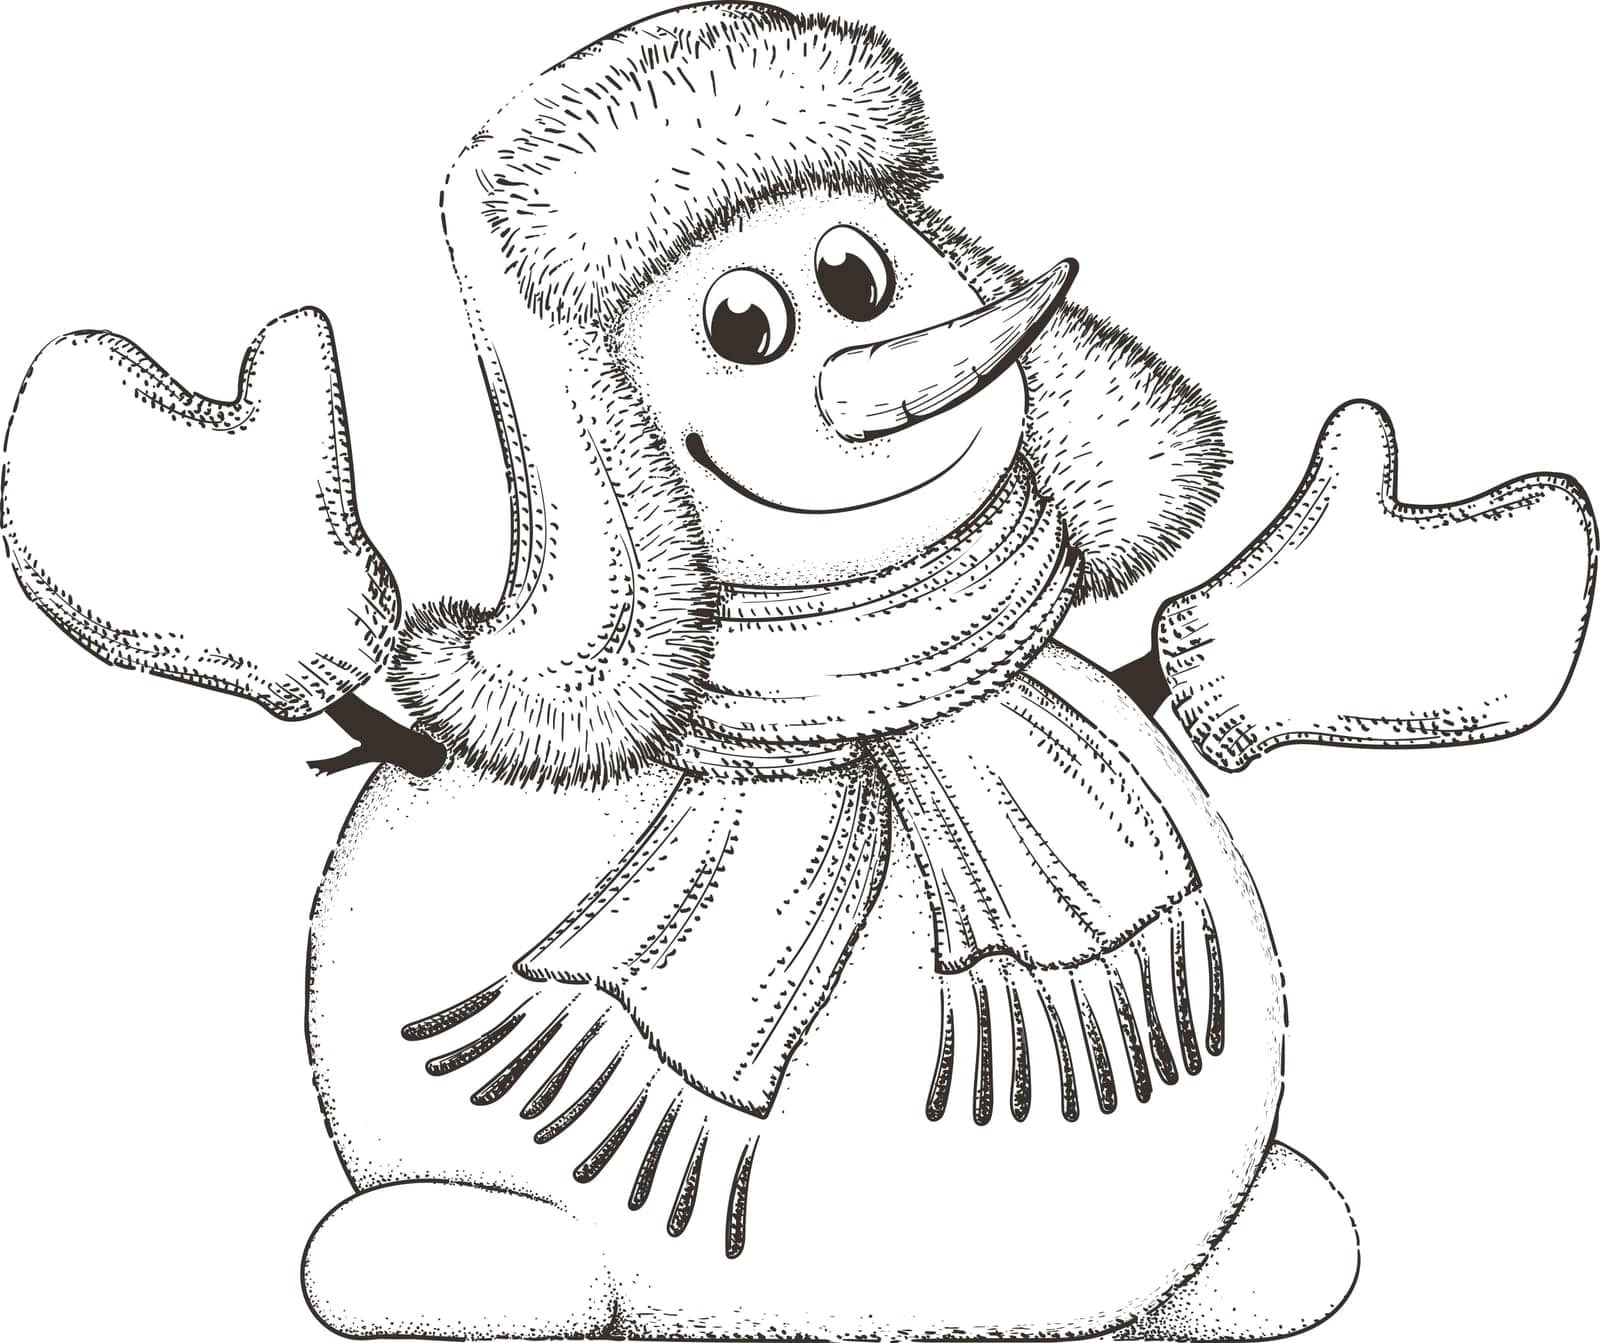 Snowman with a scarf, gloves and hat.Winter icon.Xmas and New Year elements. by tan_tan